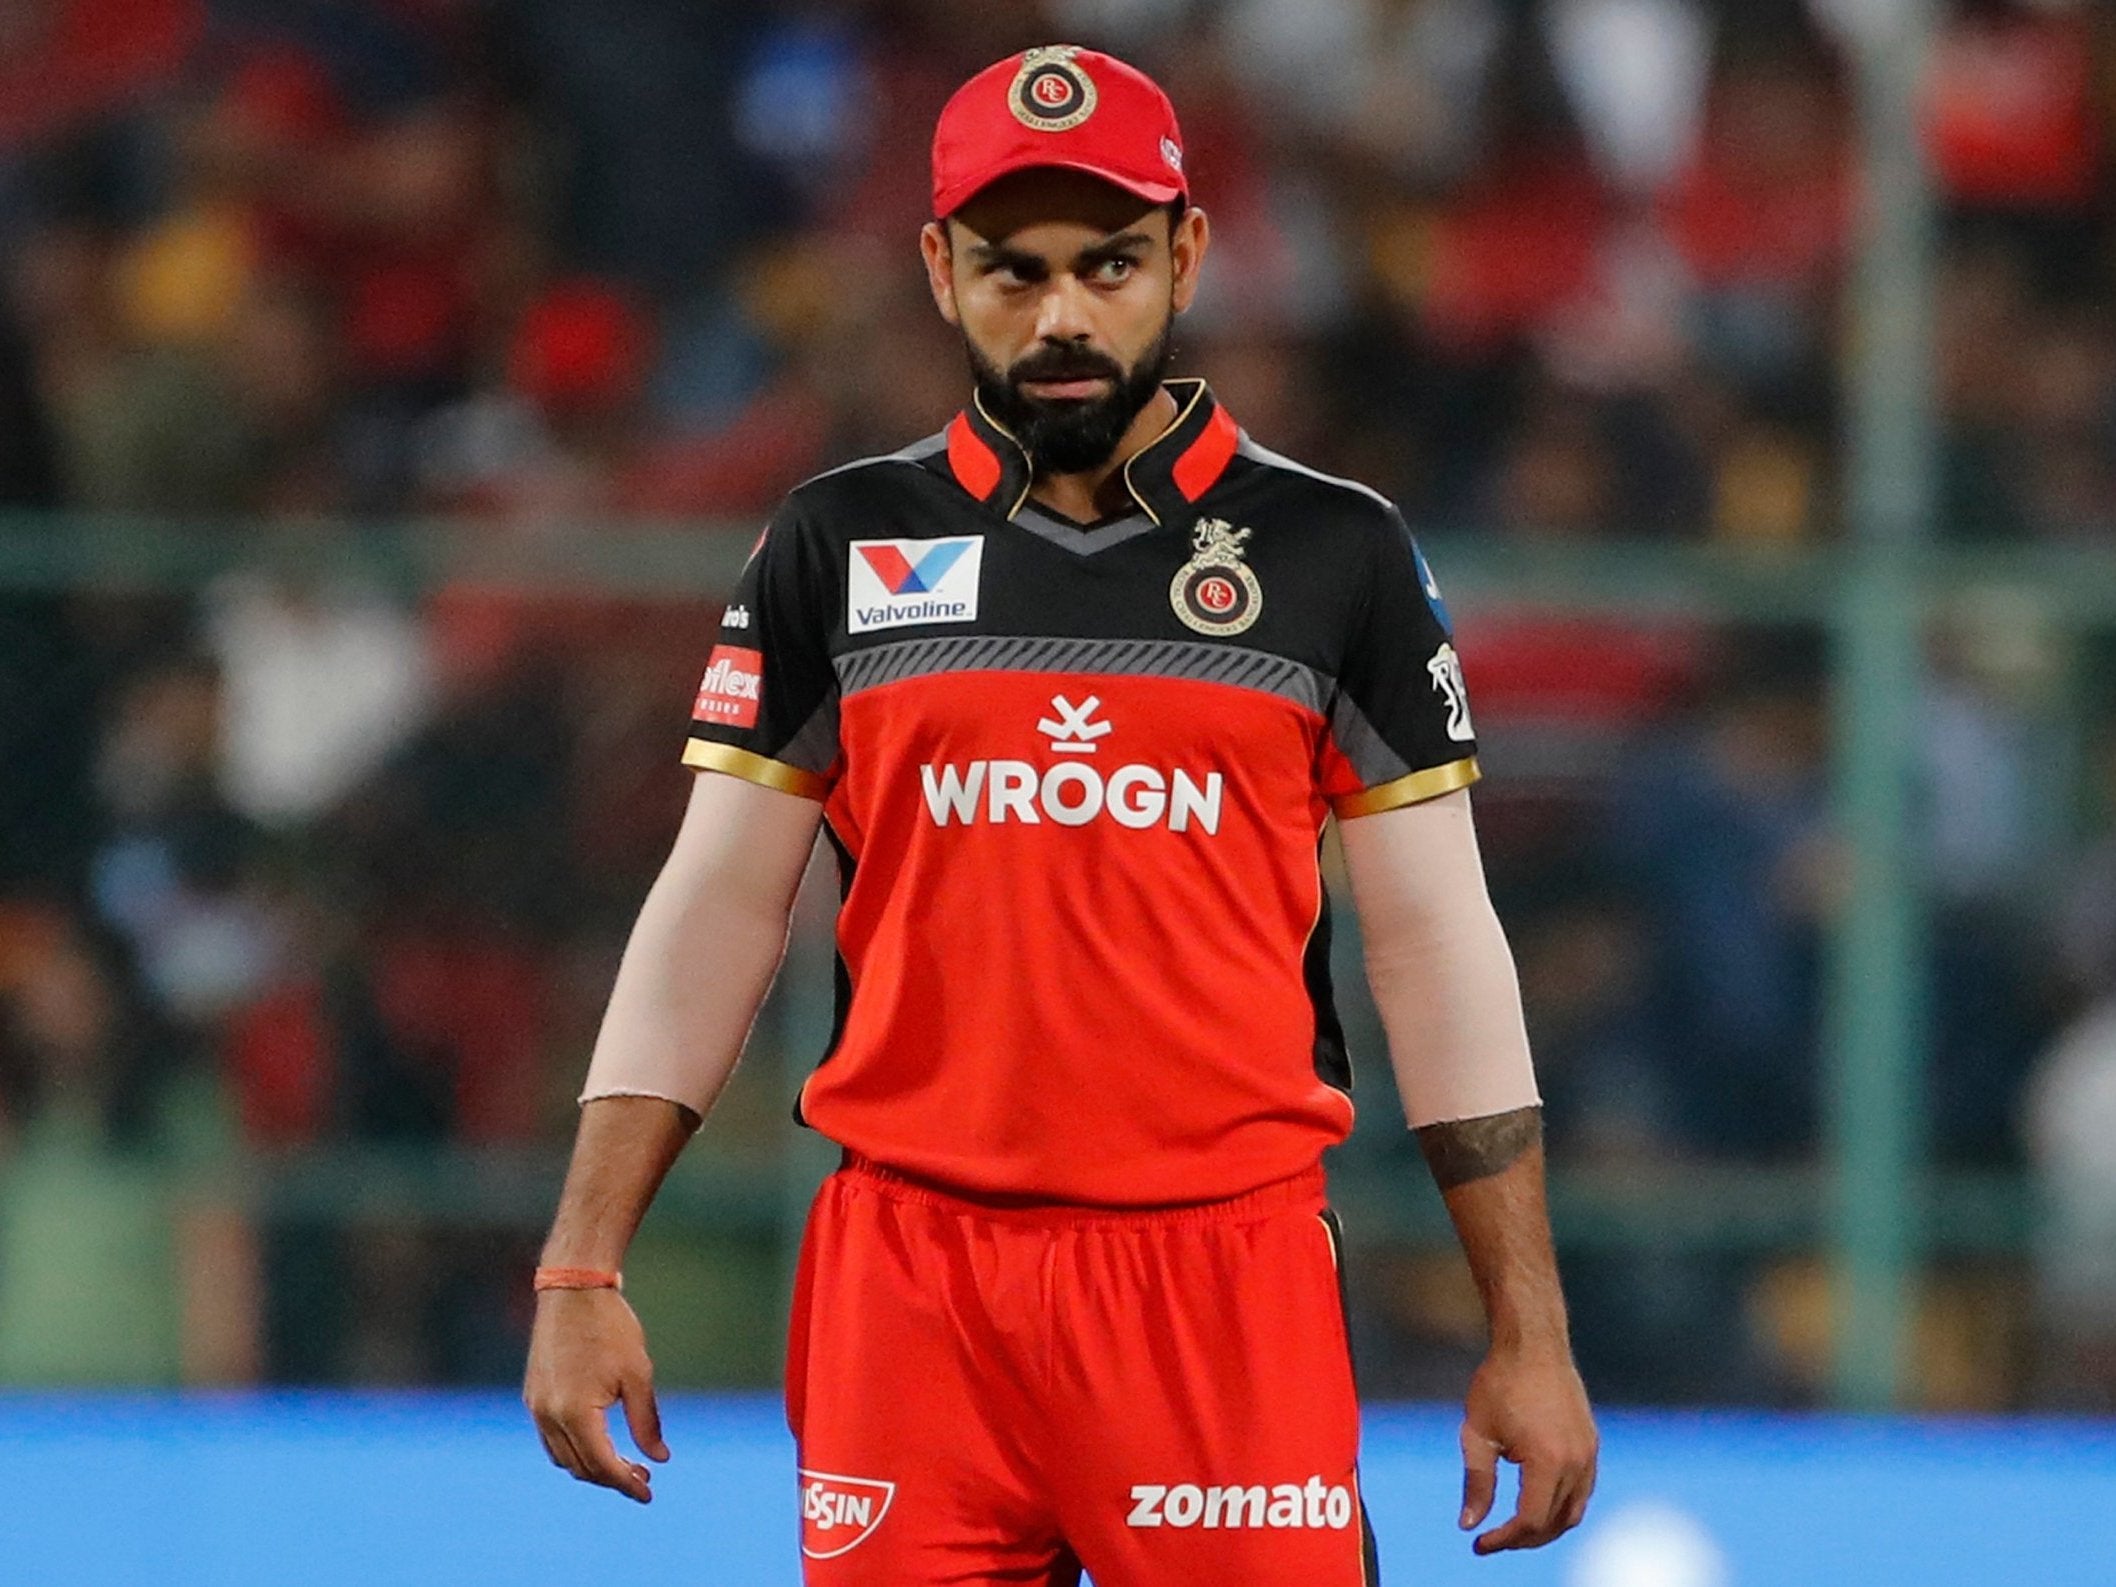 Royal Challengers Bangalore captain Virat Kohli was furious with the failure to spot the no-ball